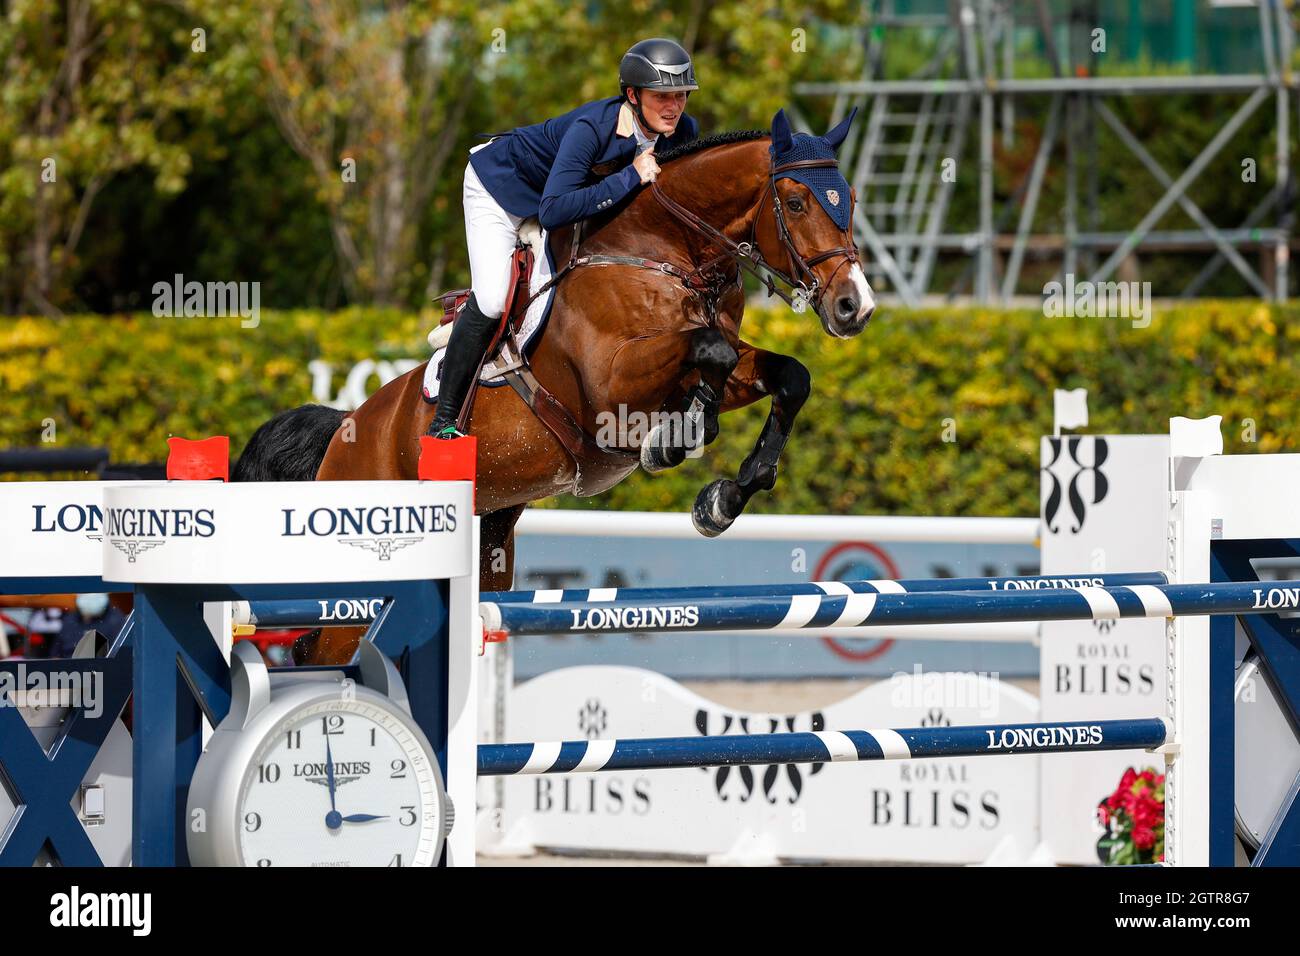 Michael Duffy of Ireland riding RMF Charly during the CSIO Barcelona: Longines FEI jumping Nations Cup at Real Club de Polo of Barcelona. Stock Photo